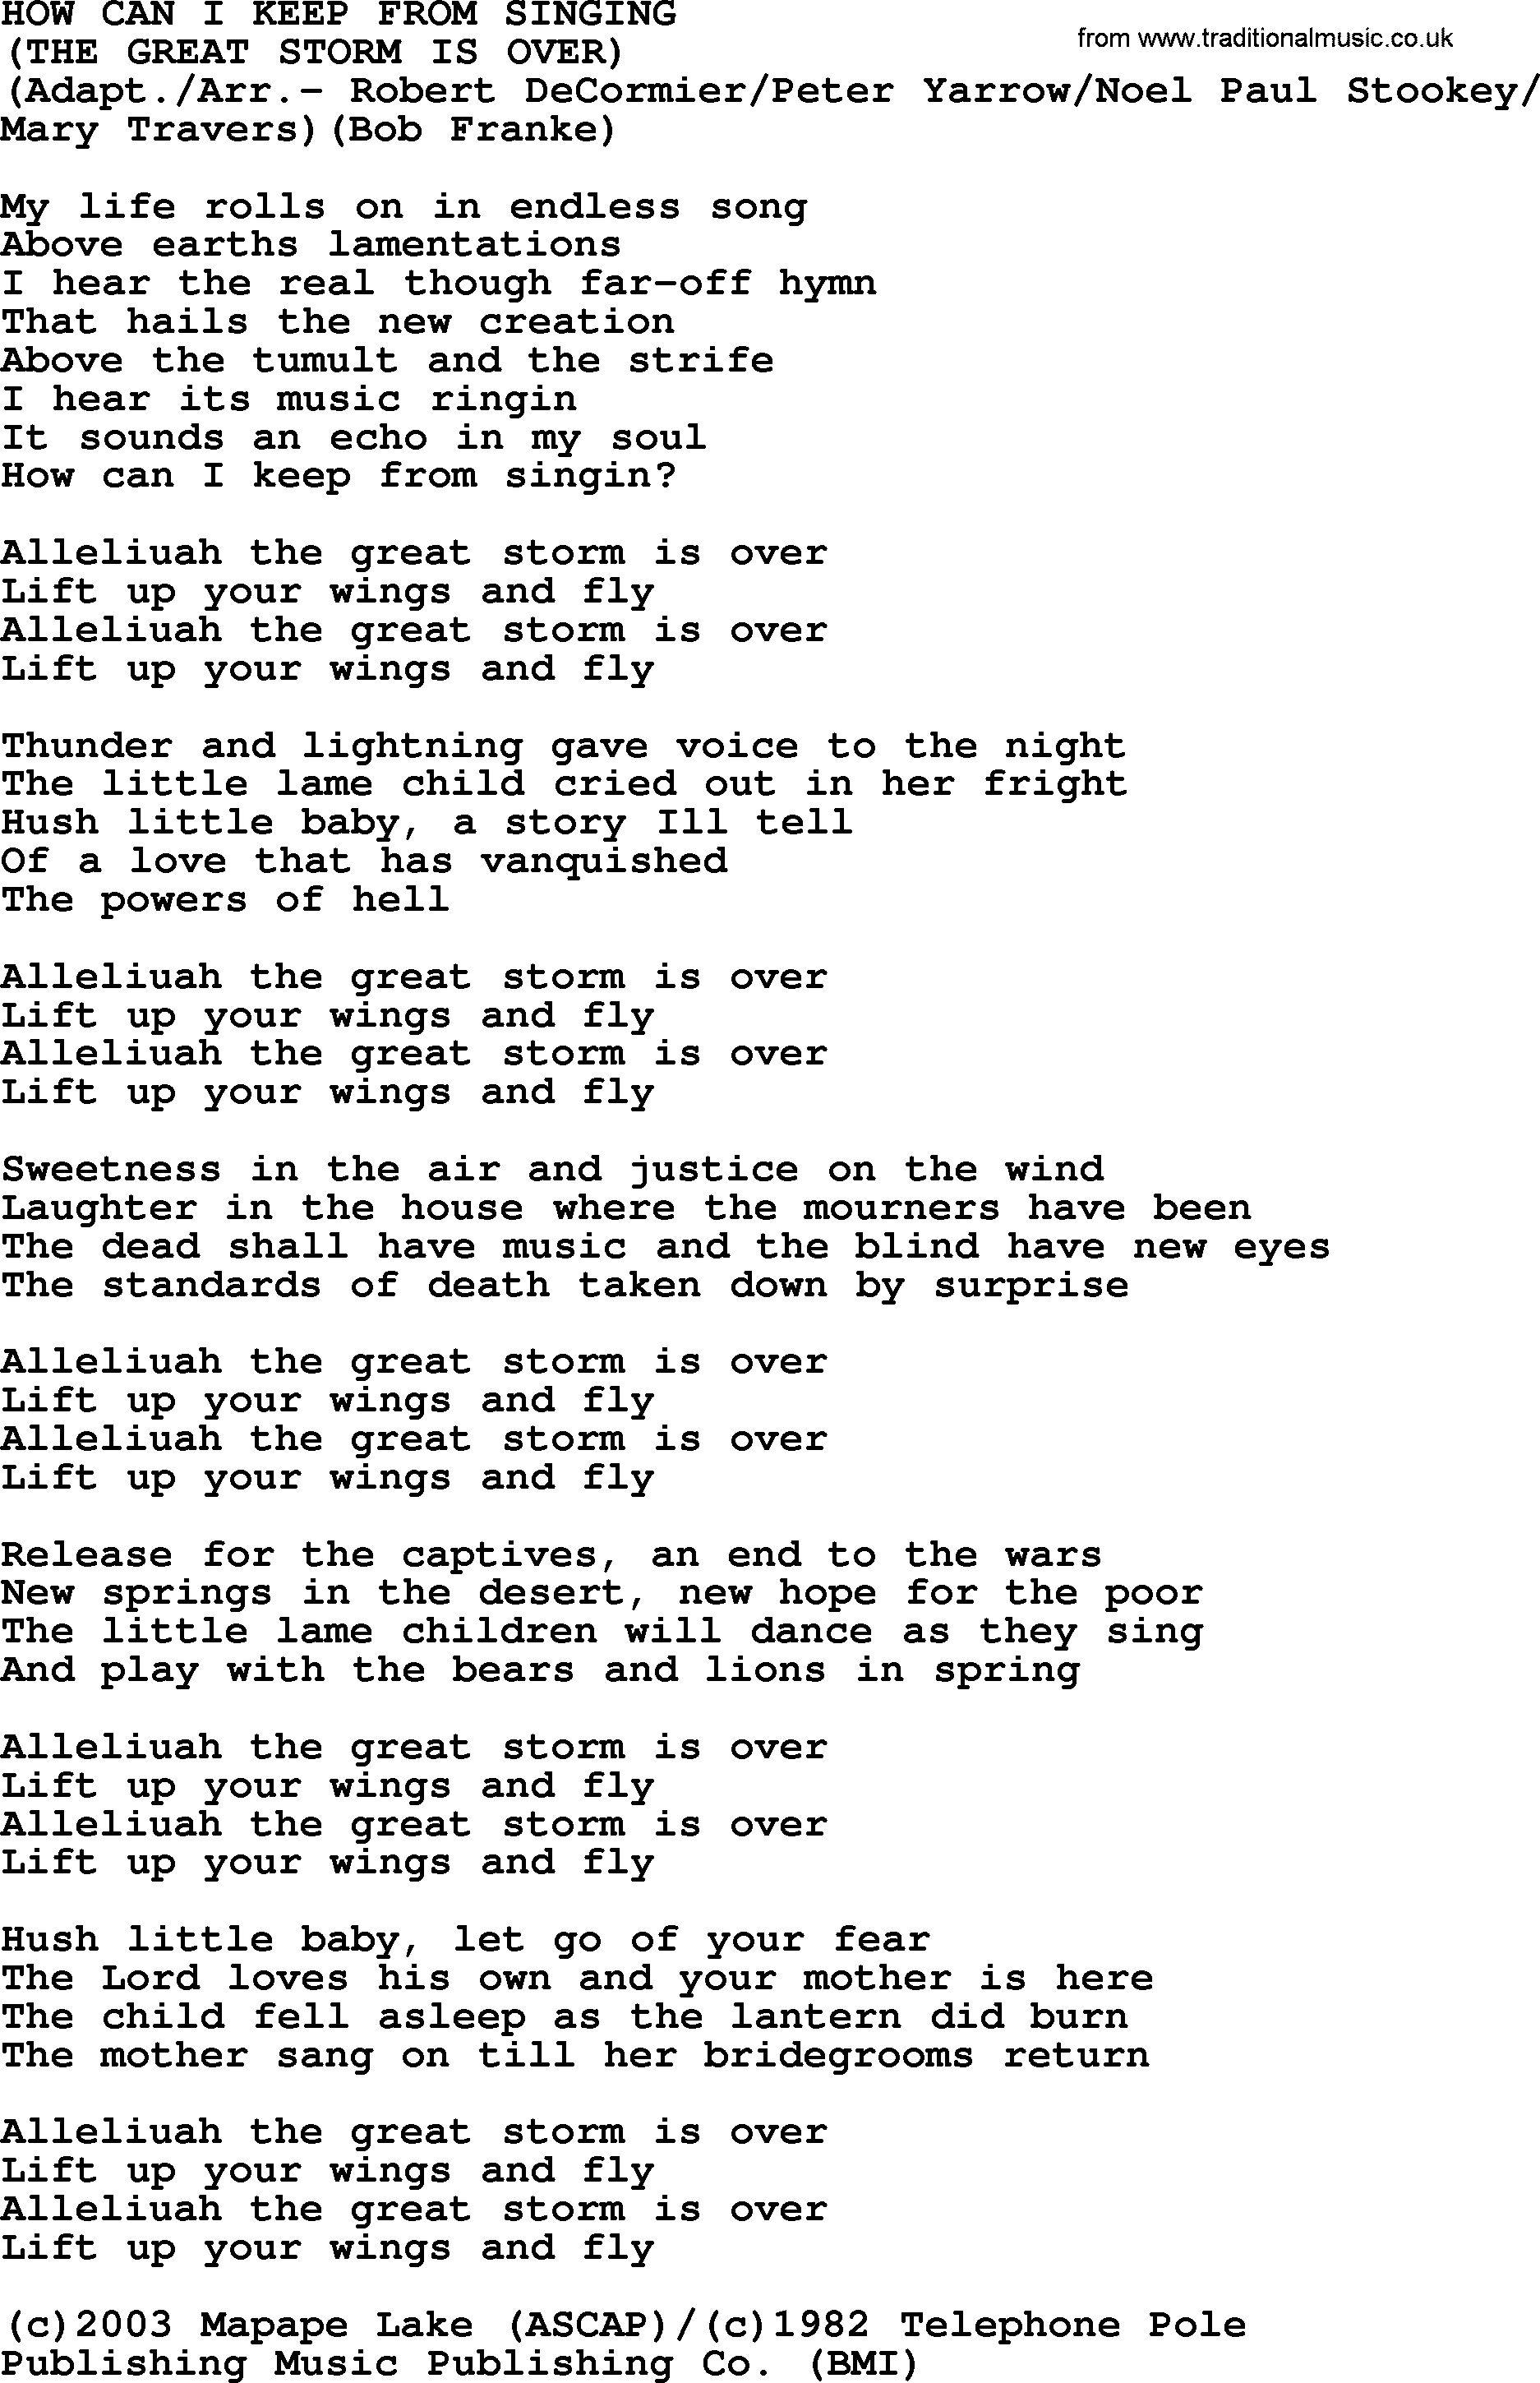 Peter, Paul and Mary song How Can I Keep From Singing lyrics